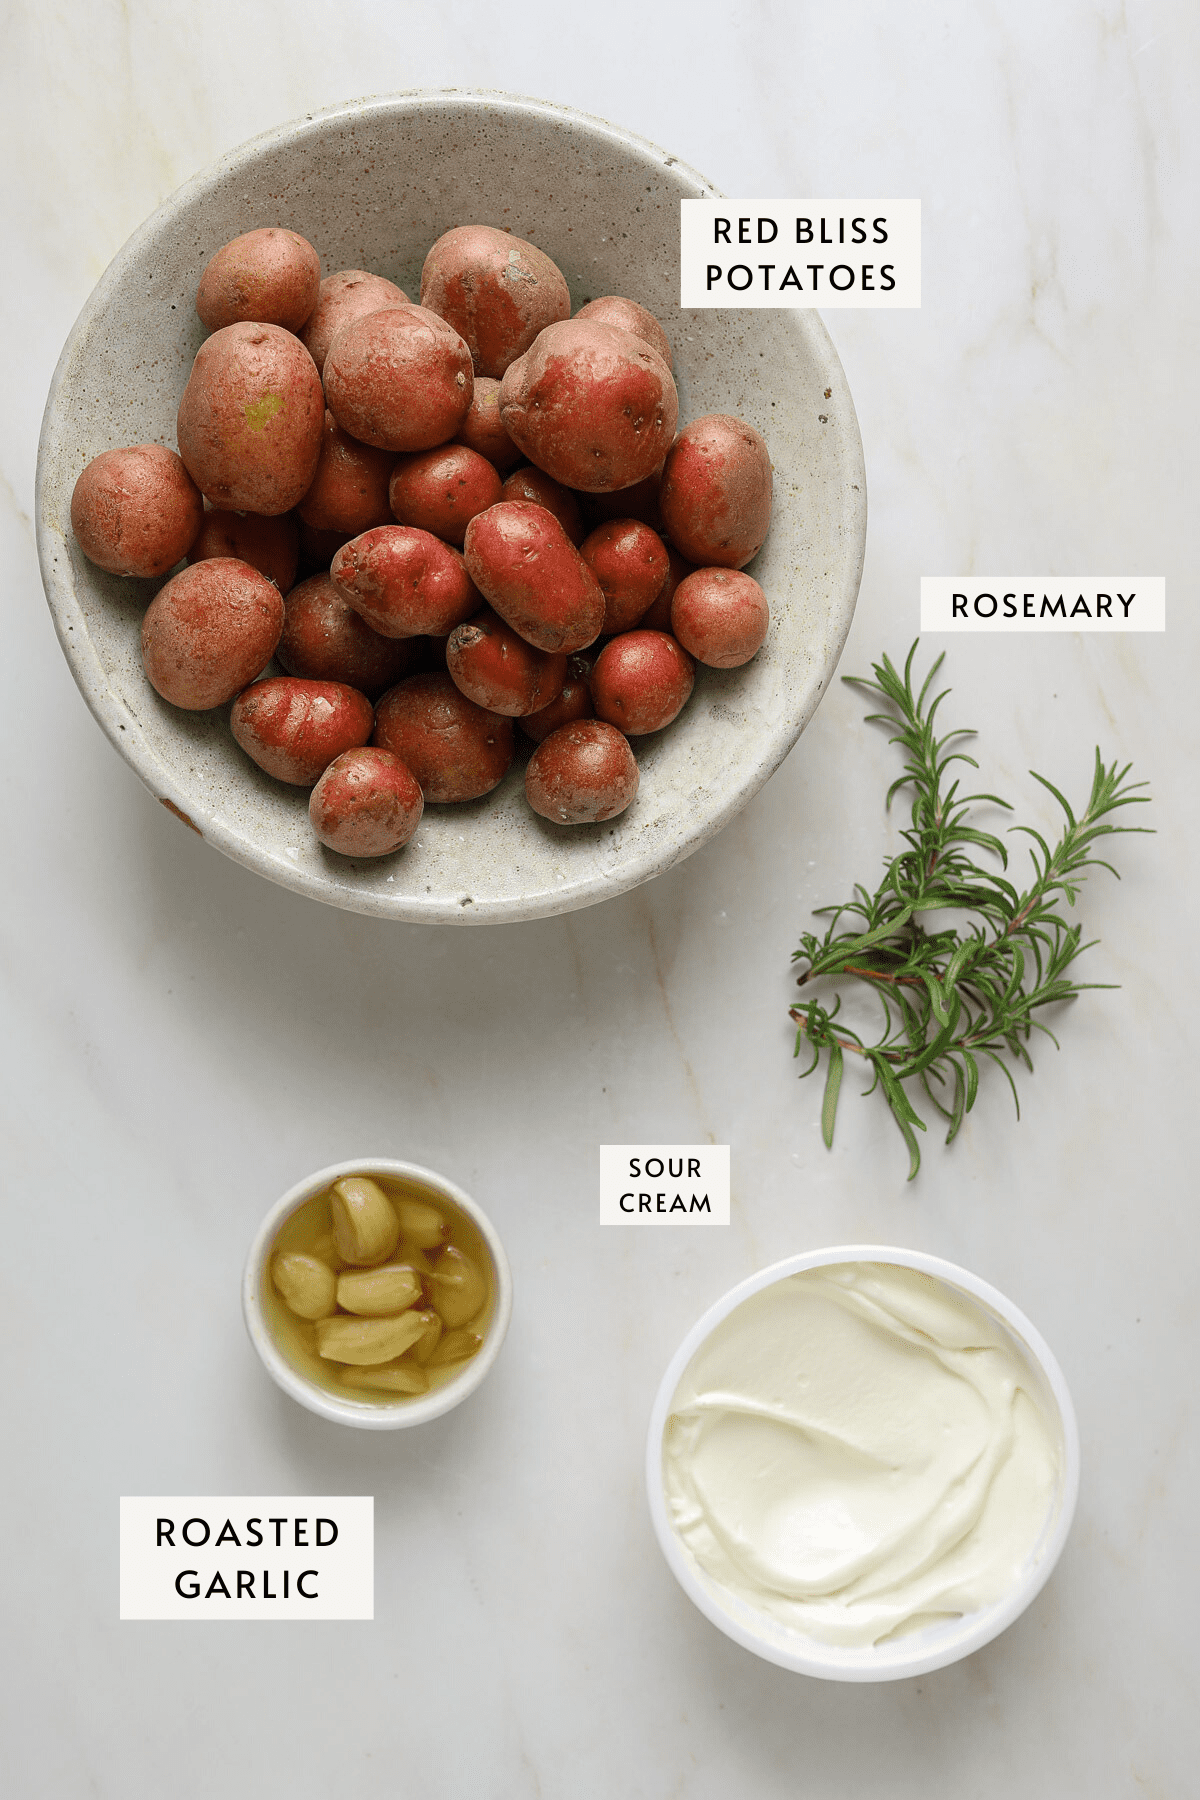 A bowl or red bliss potatoes, three sprigs of rosemary, a small bowl of roasted garlic cloves, a tub of sour cream.